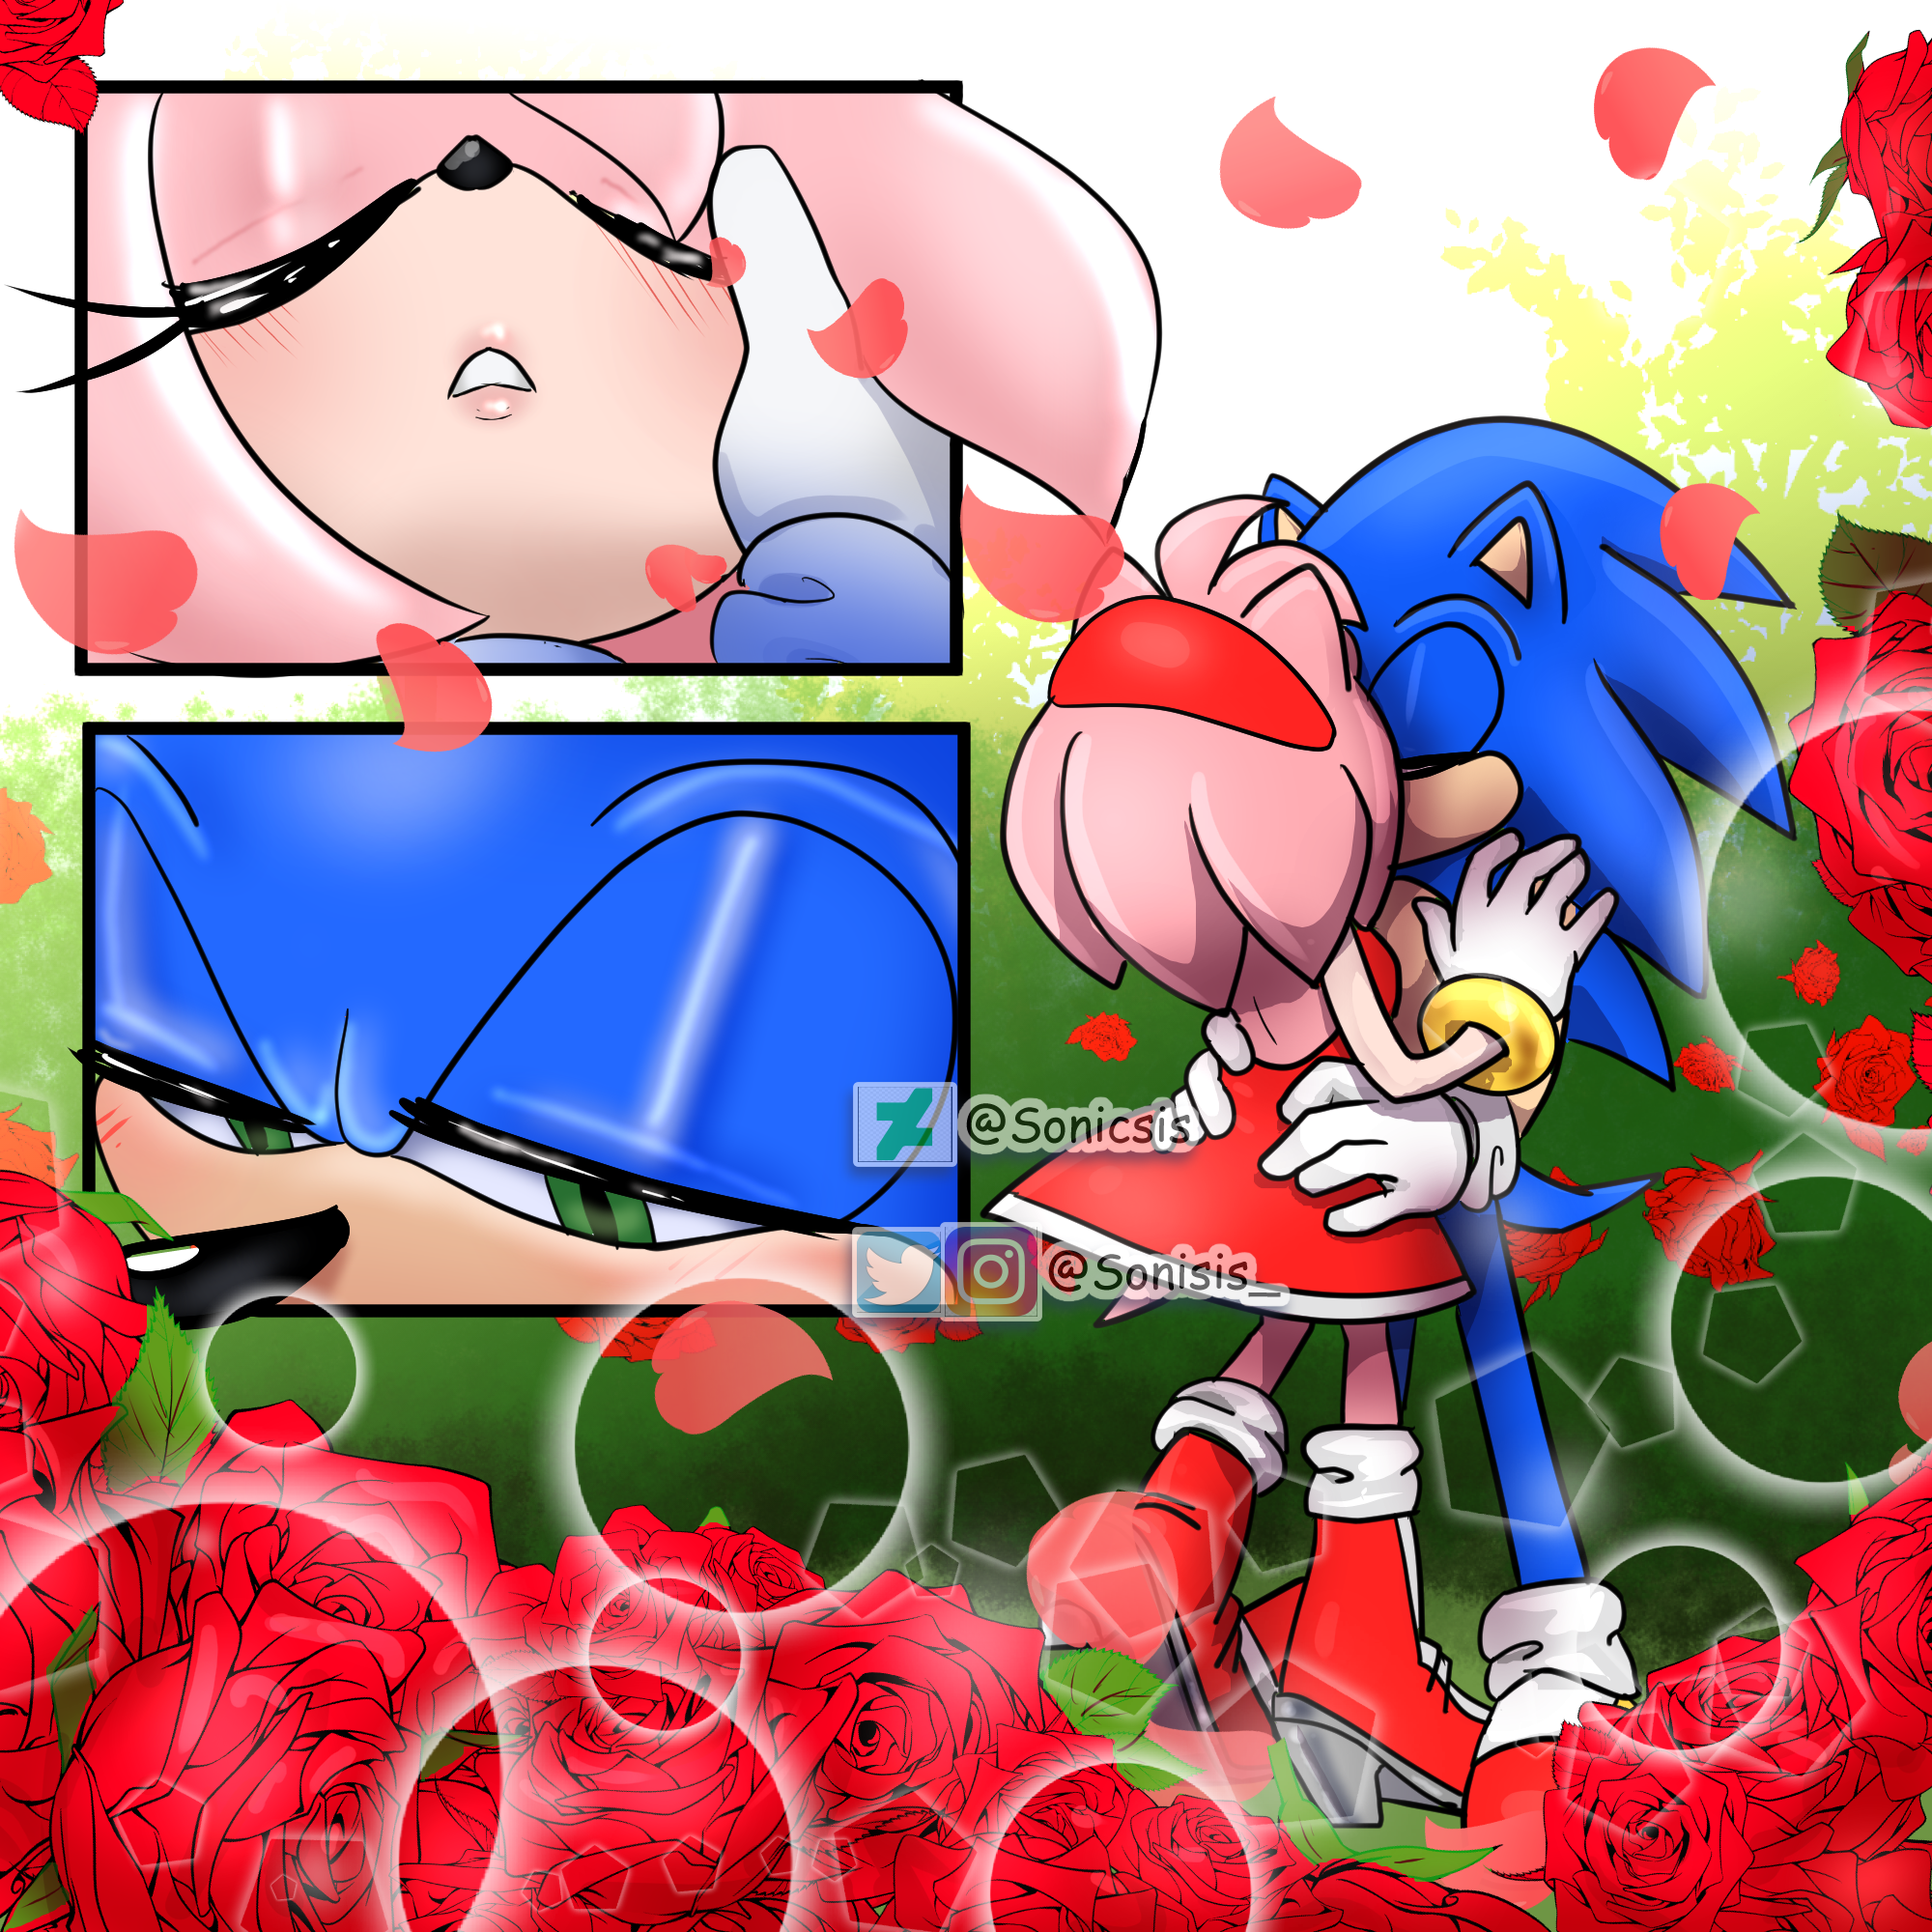 Classic Sonamy Kiss by Soneamlover on DeviantArt